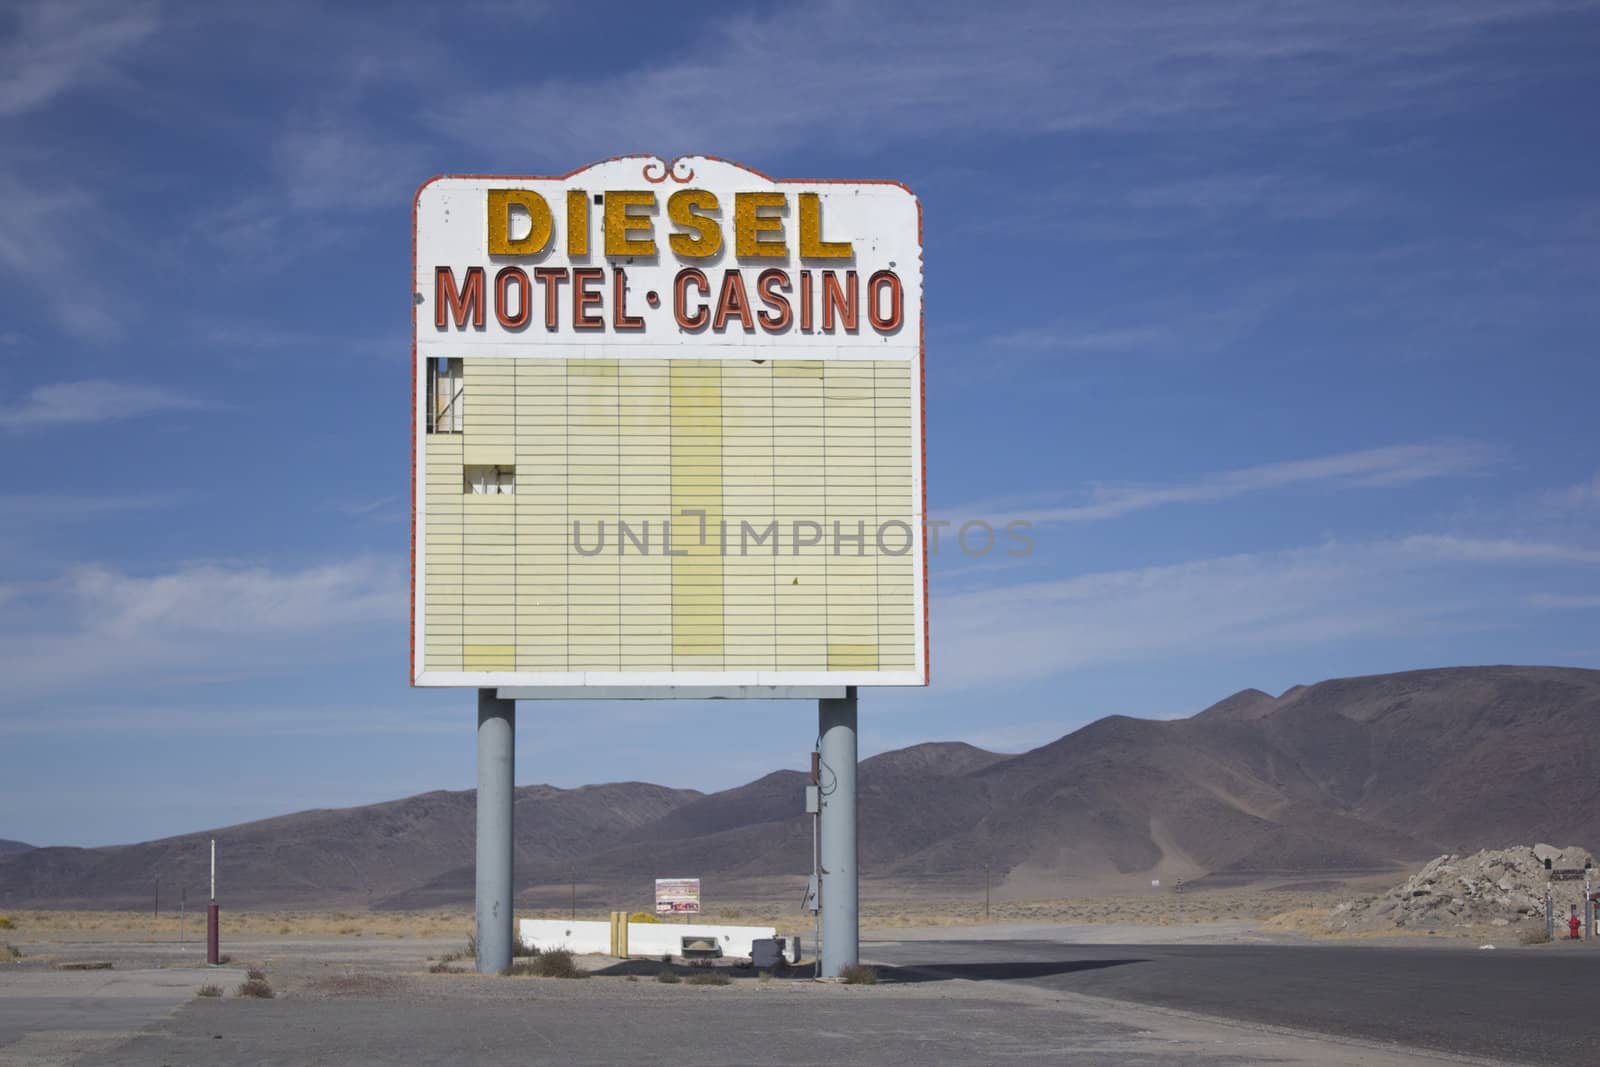 Vintage old gas diesel motel casino sign marquee in the middle of the desert